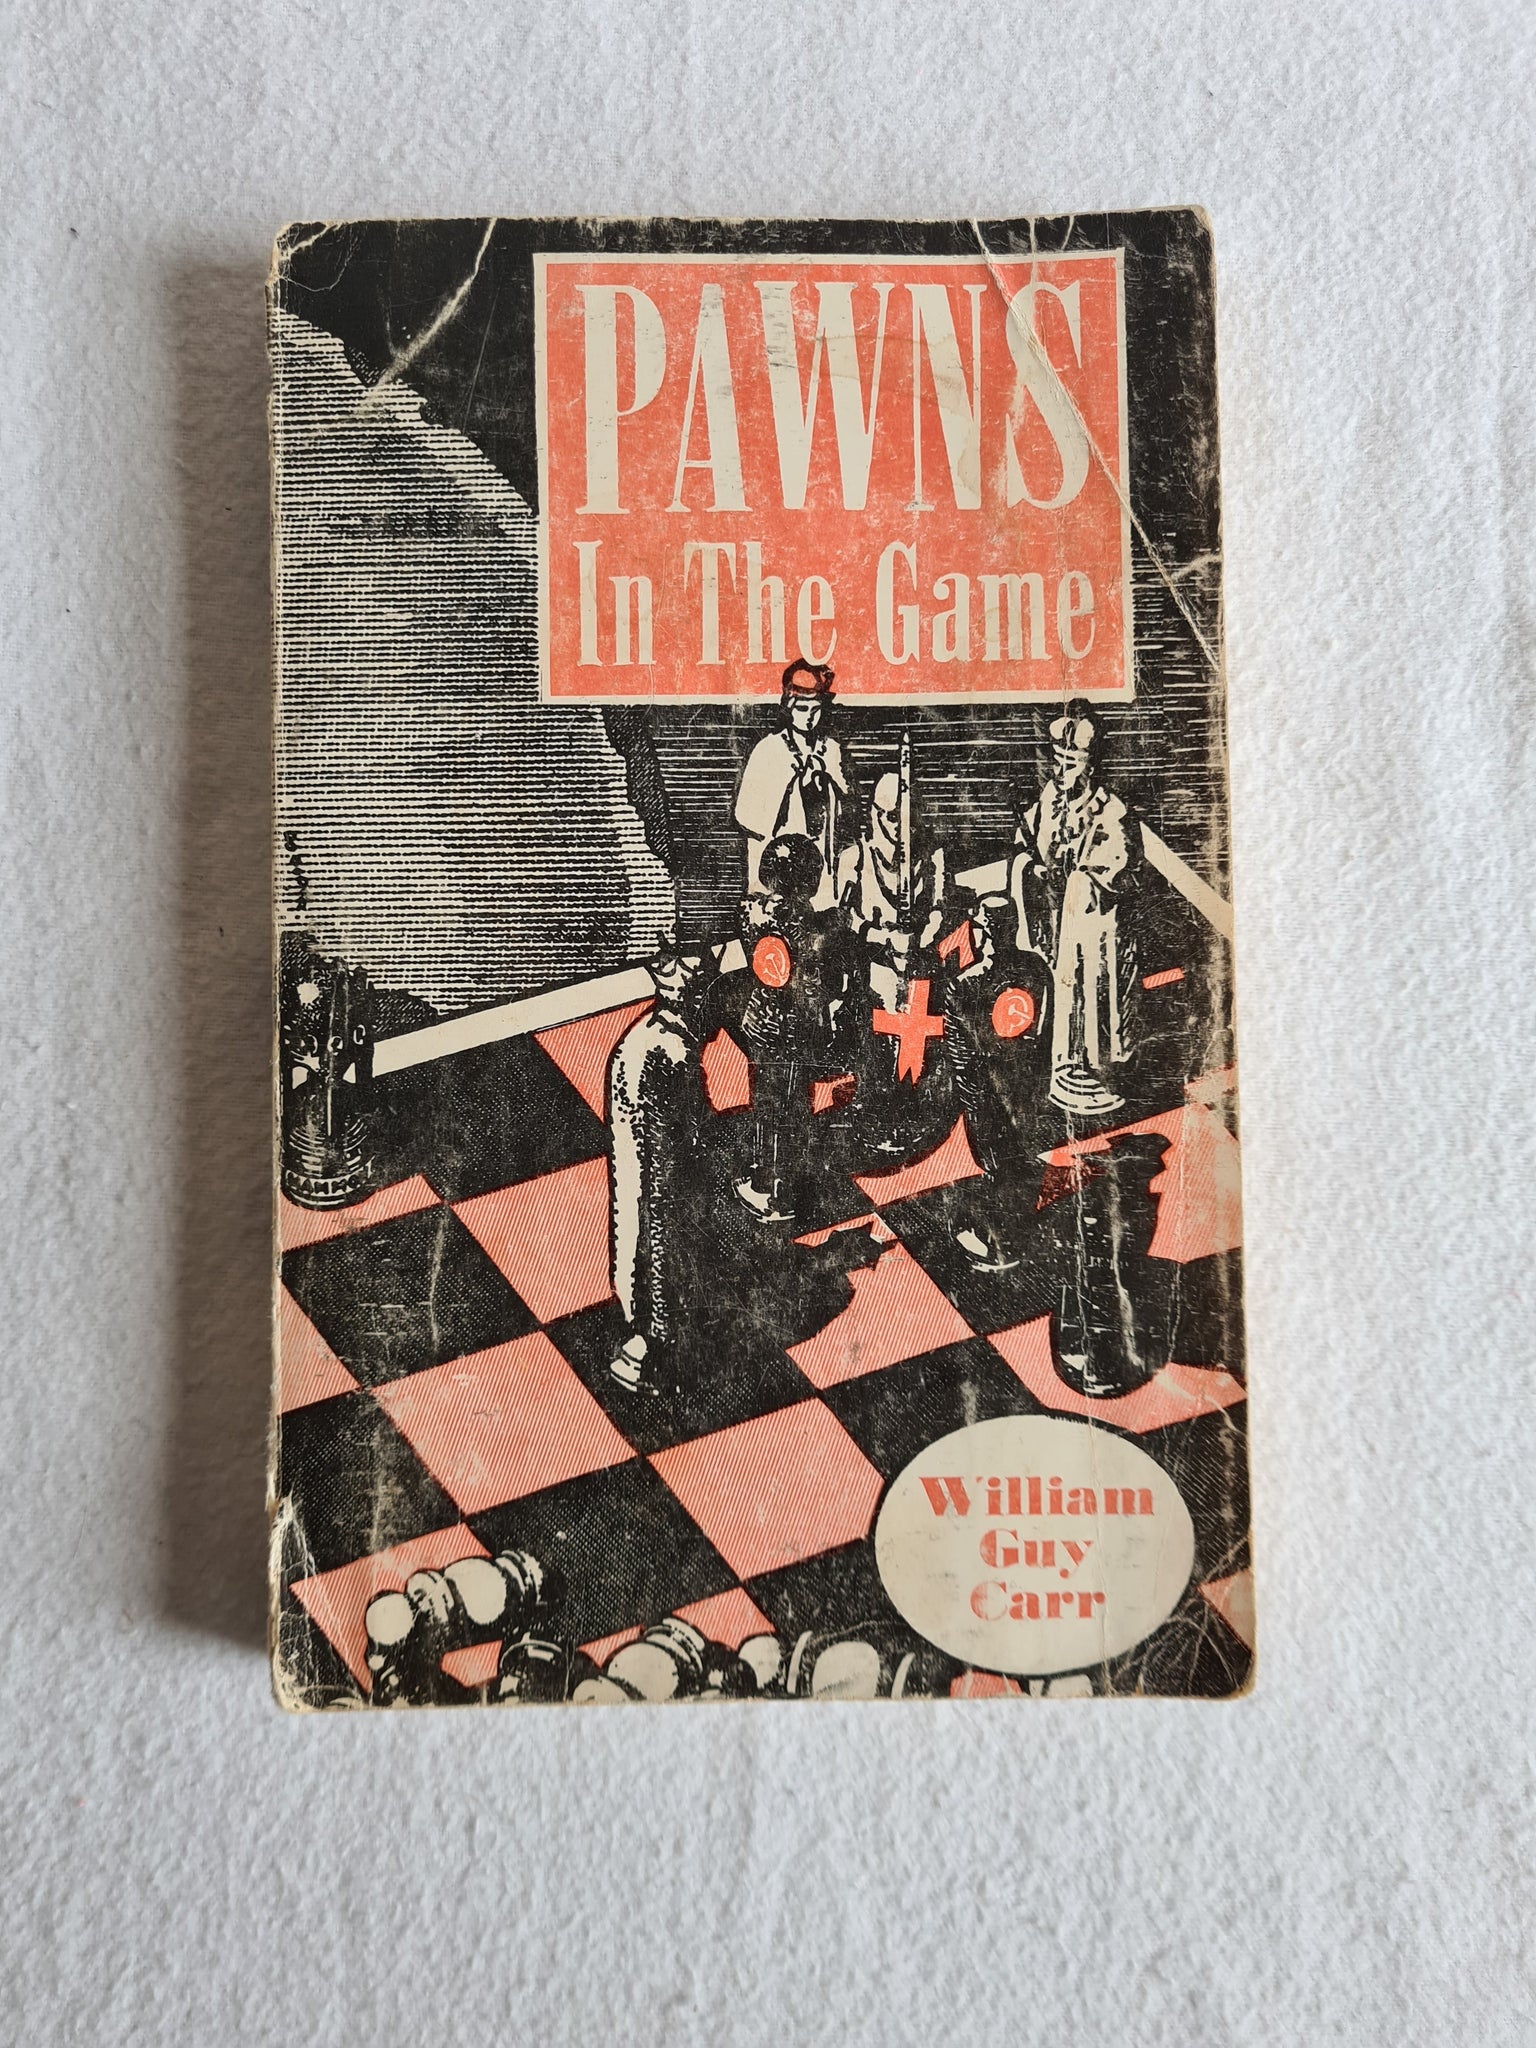 Pawns In The Game, William Guy Carr – The Book Brook